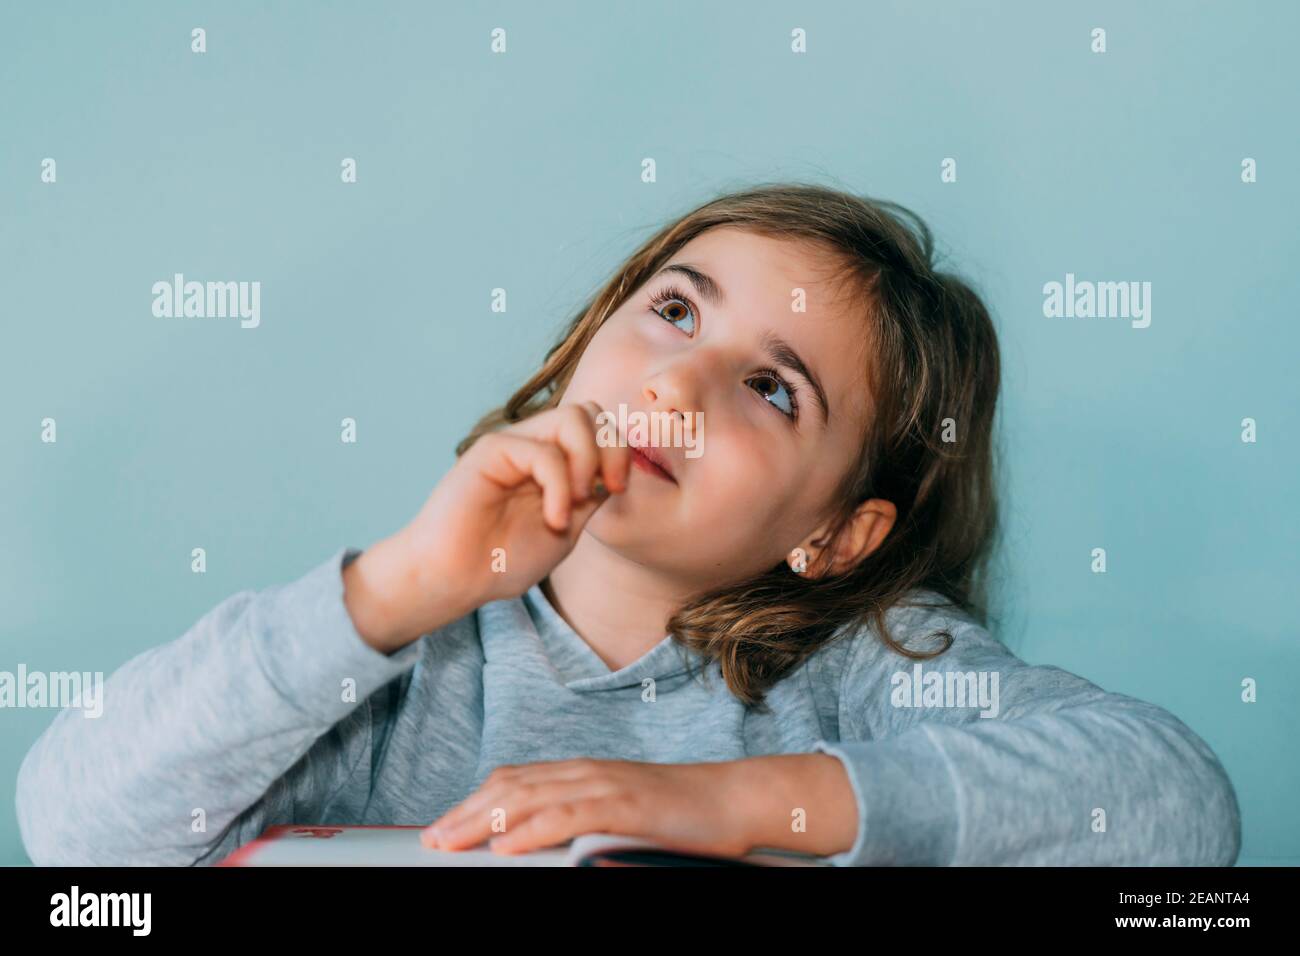 adorable little girl thinks of an idea while biting the pencil, looks up. Age 7 to 9 years, horizontal Stock Photo